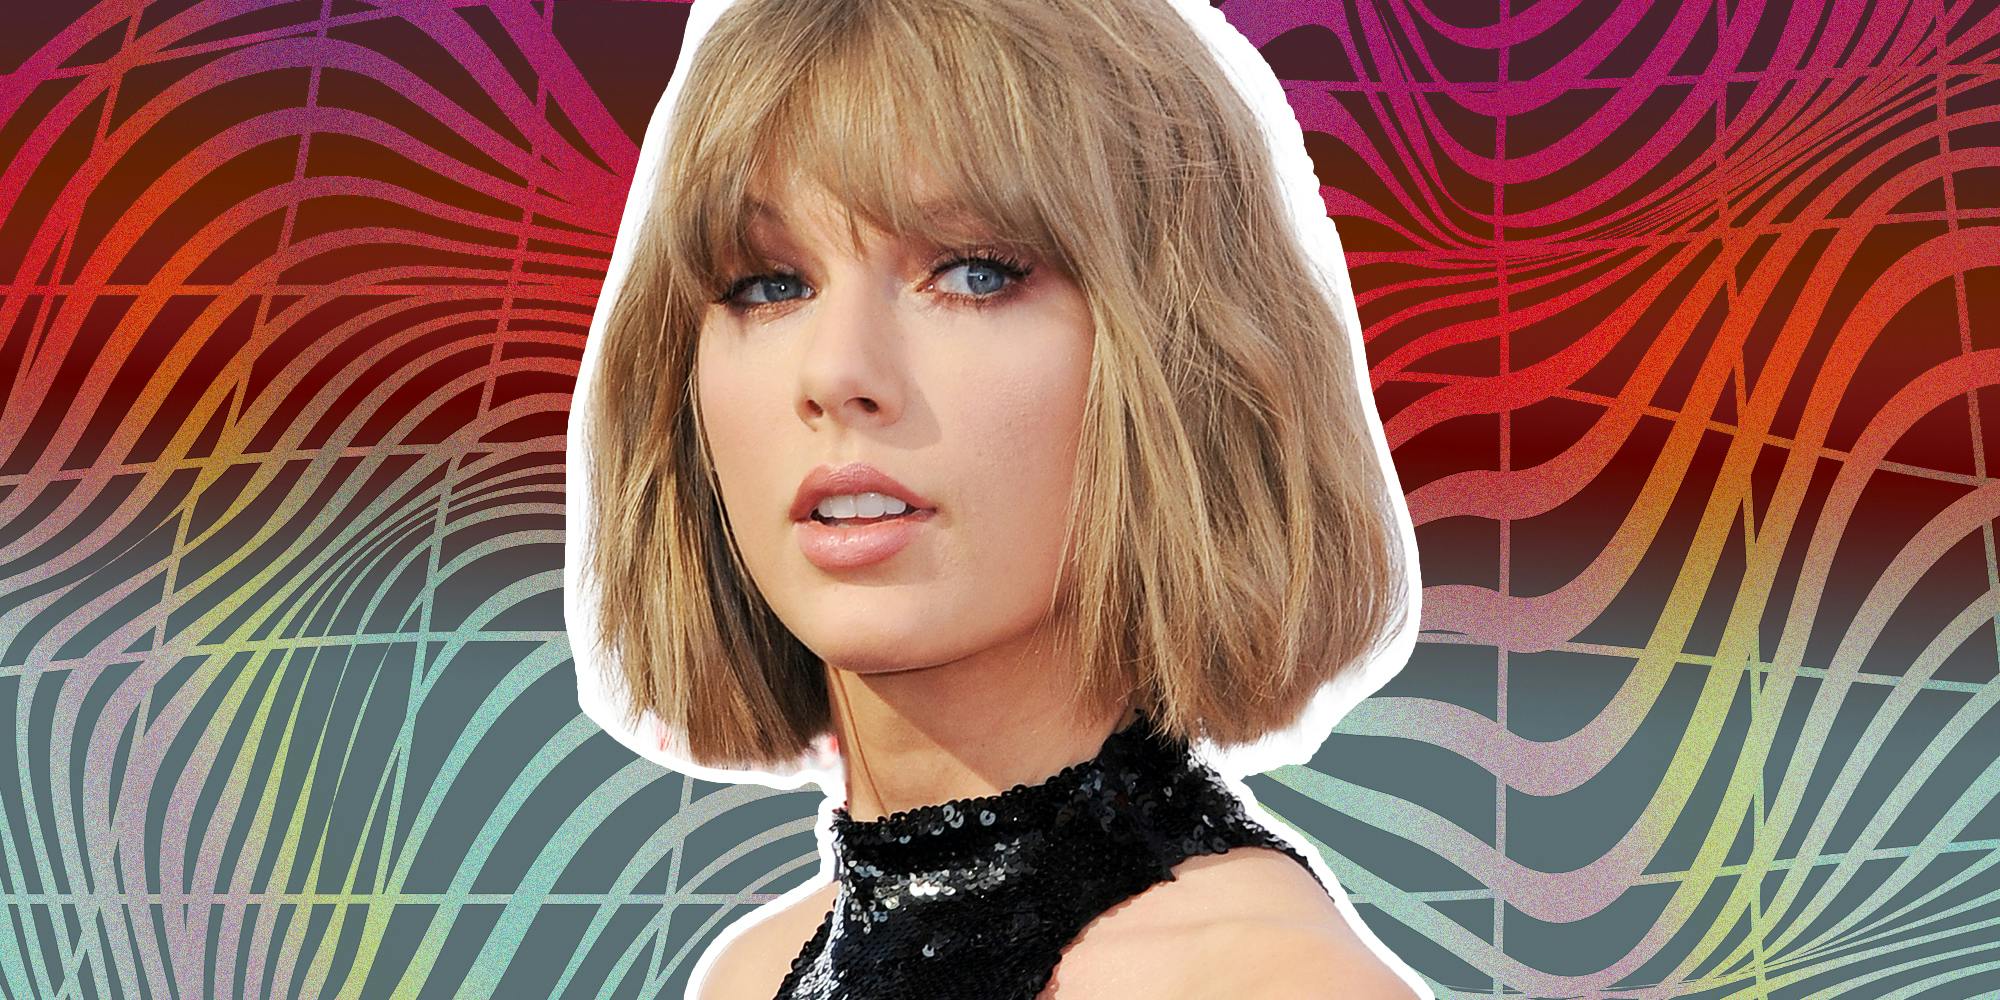 After her latest album, the Swifties are trying to gatekeep Taylor Swift